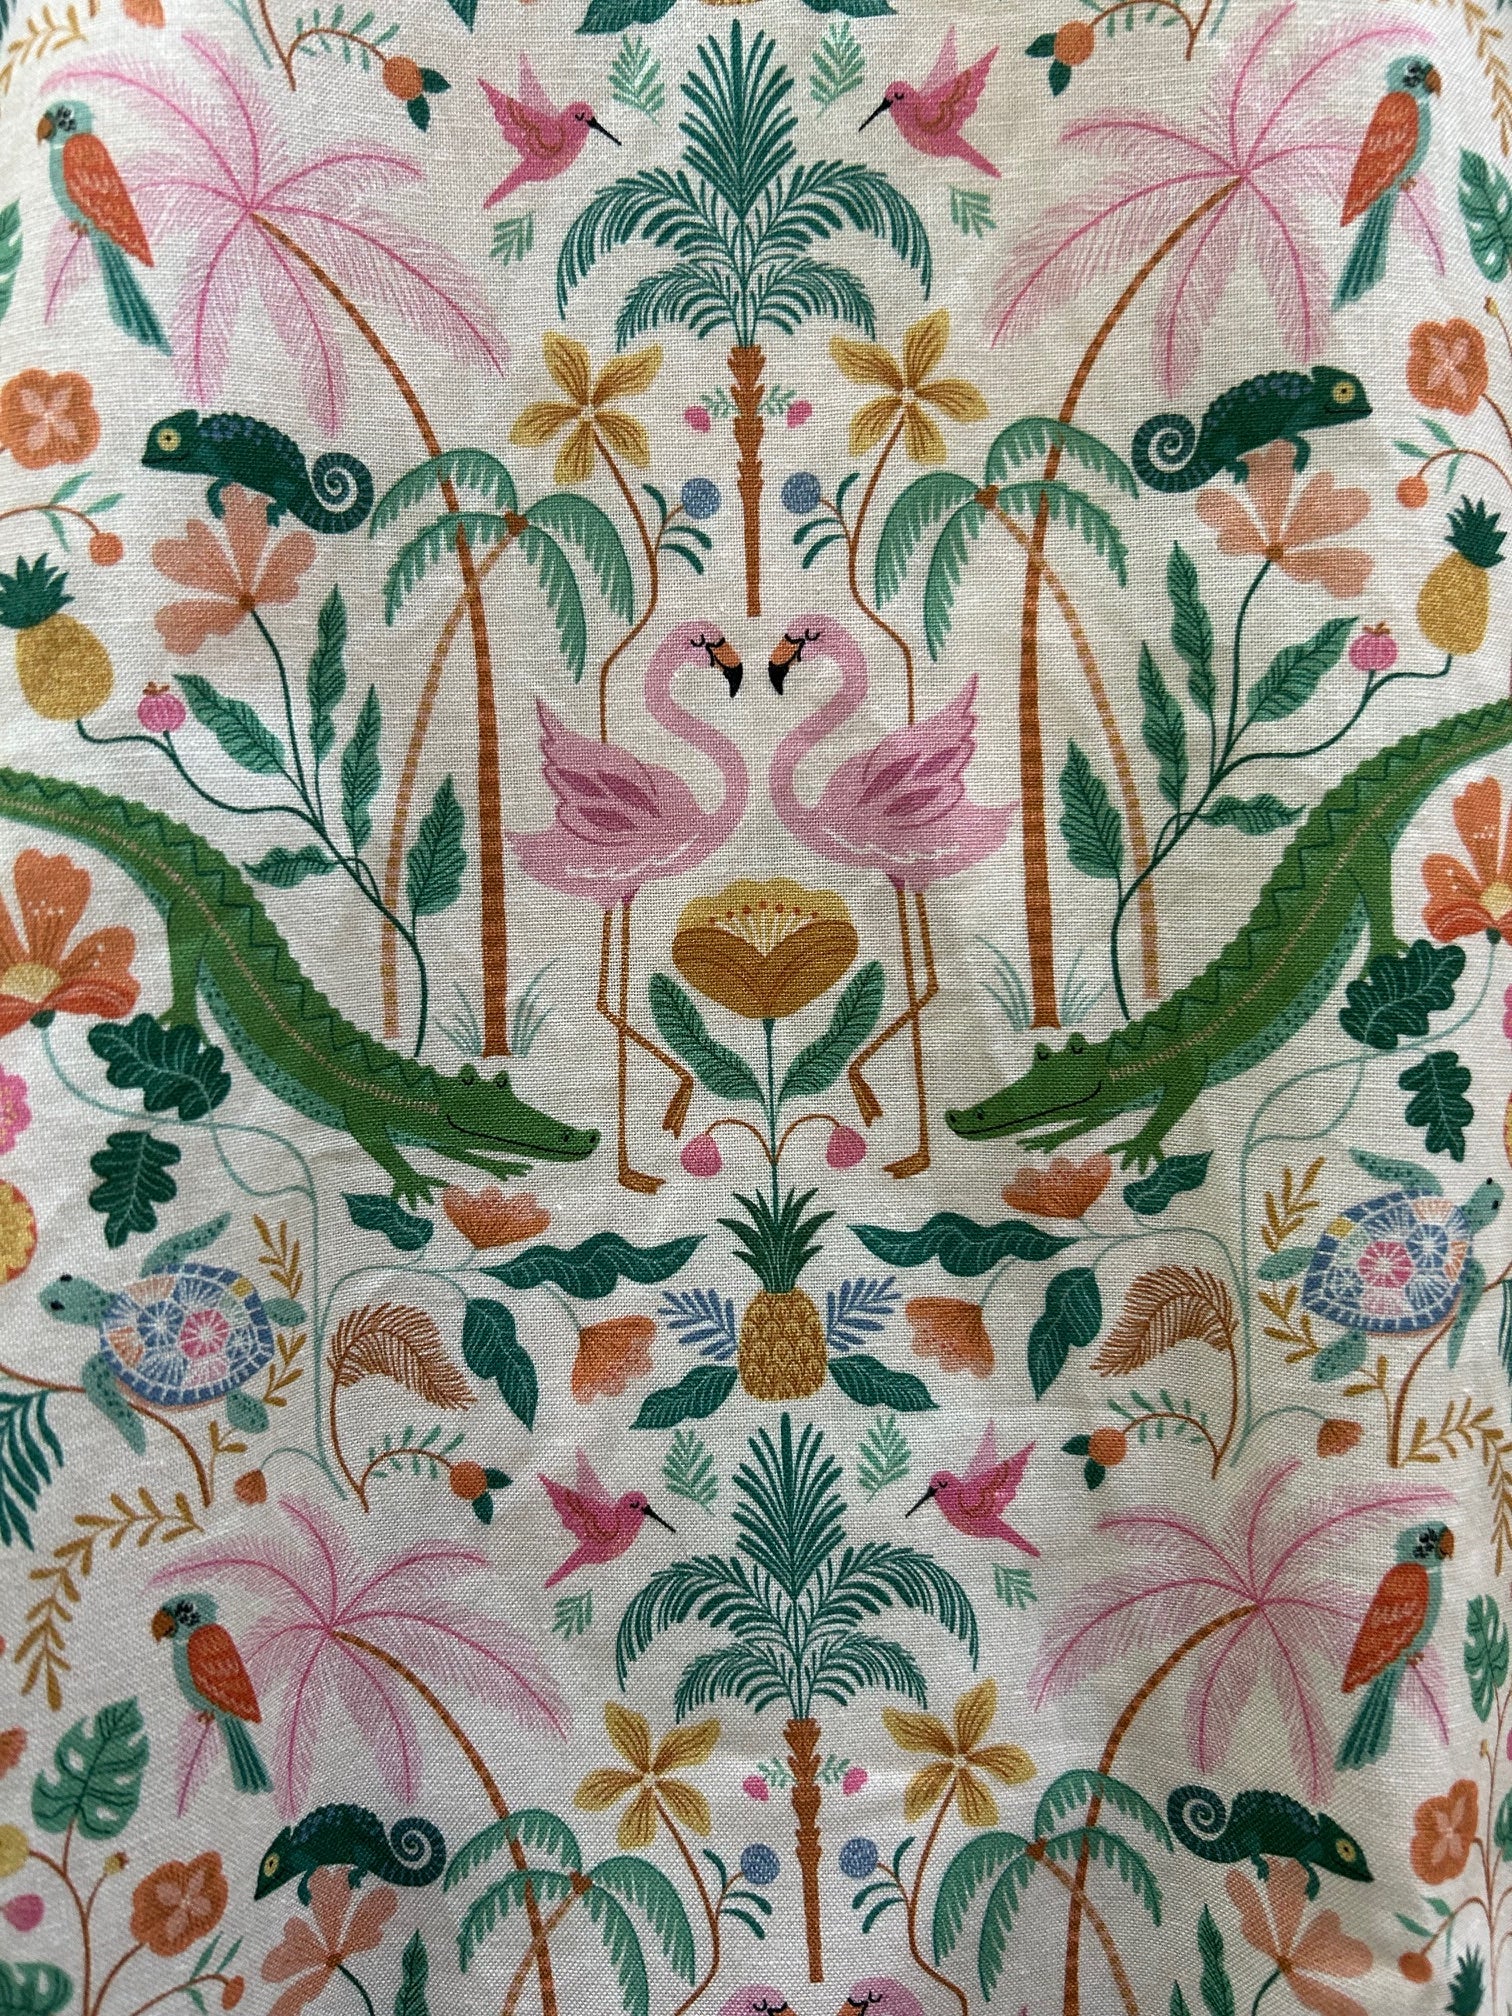 close up of the fabric showing the details of the print with aligators, flamingoes and palm trees